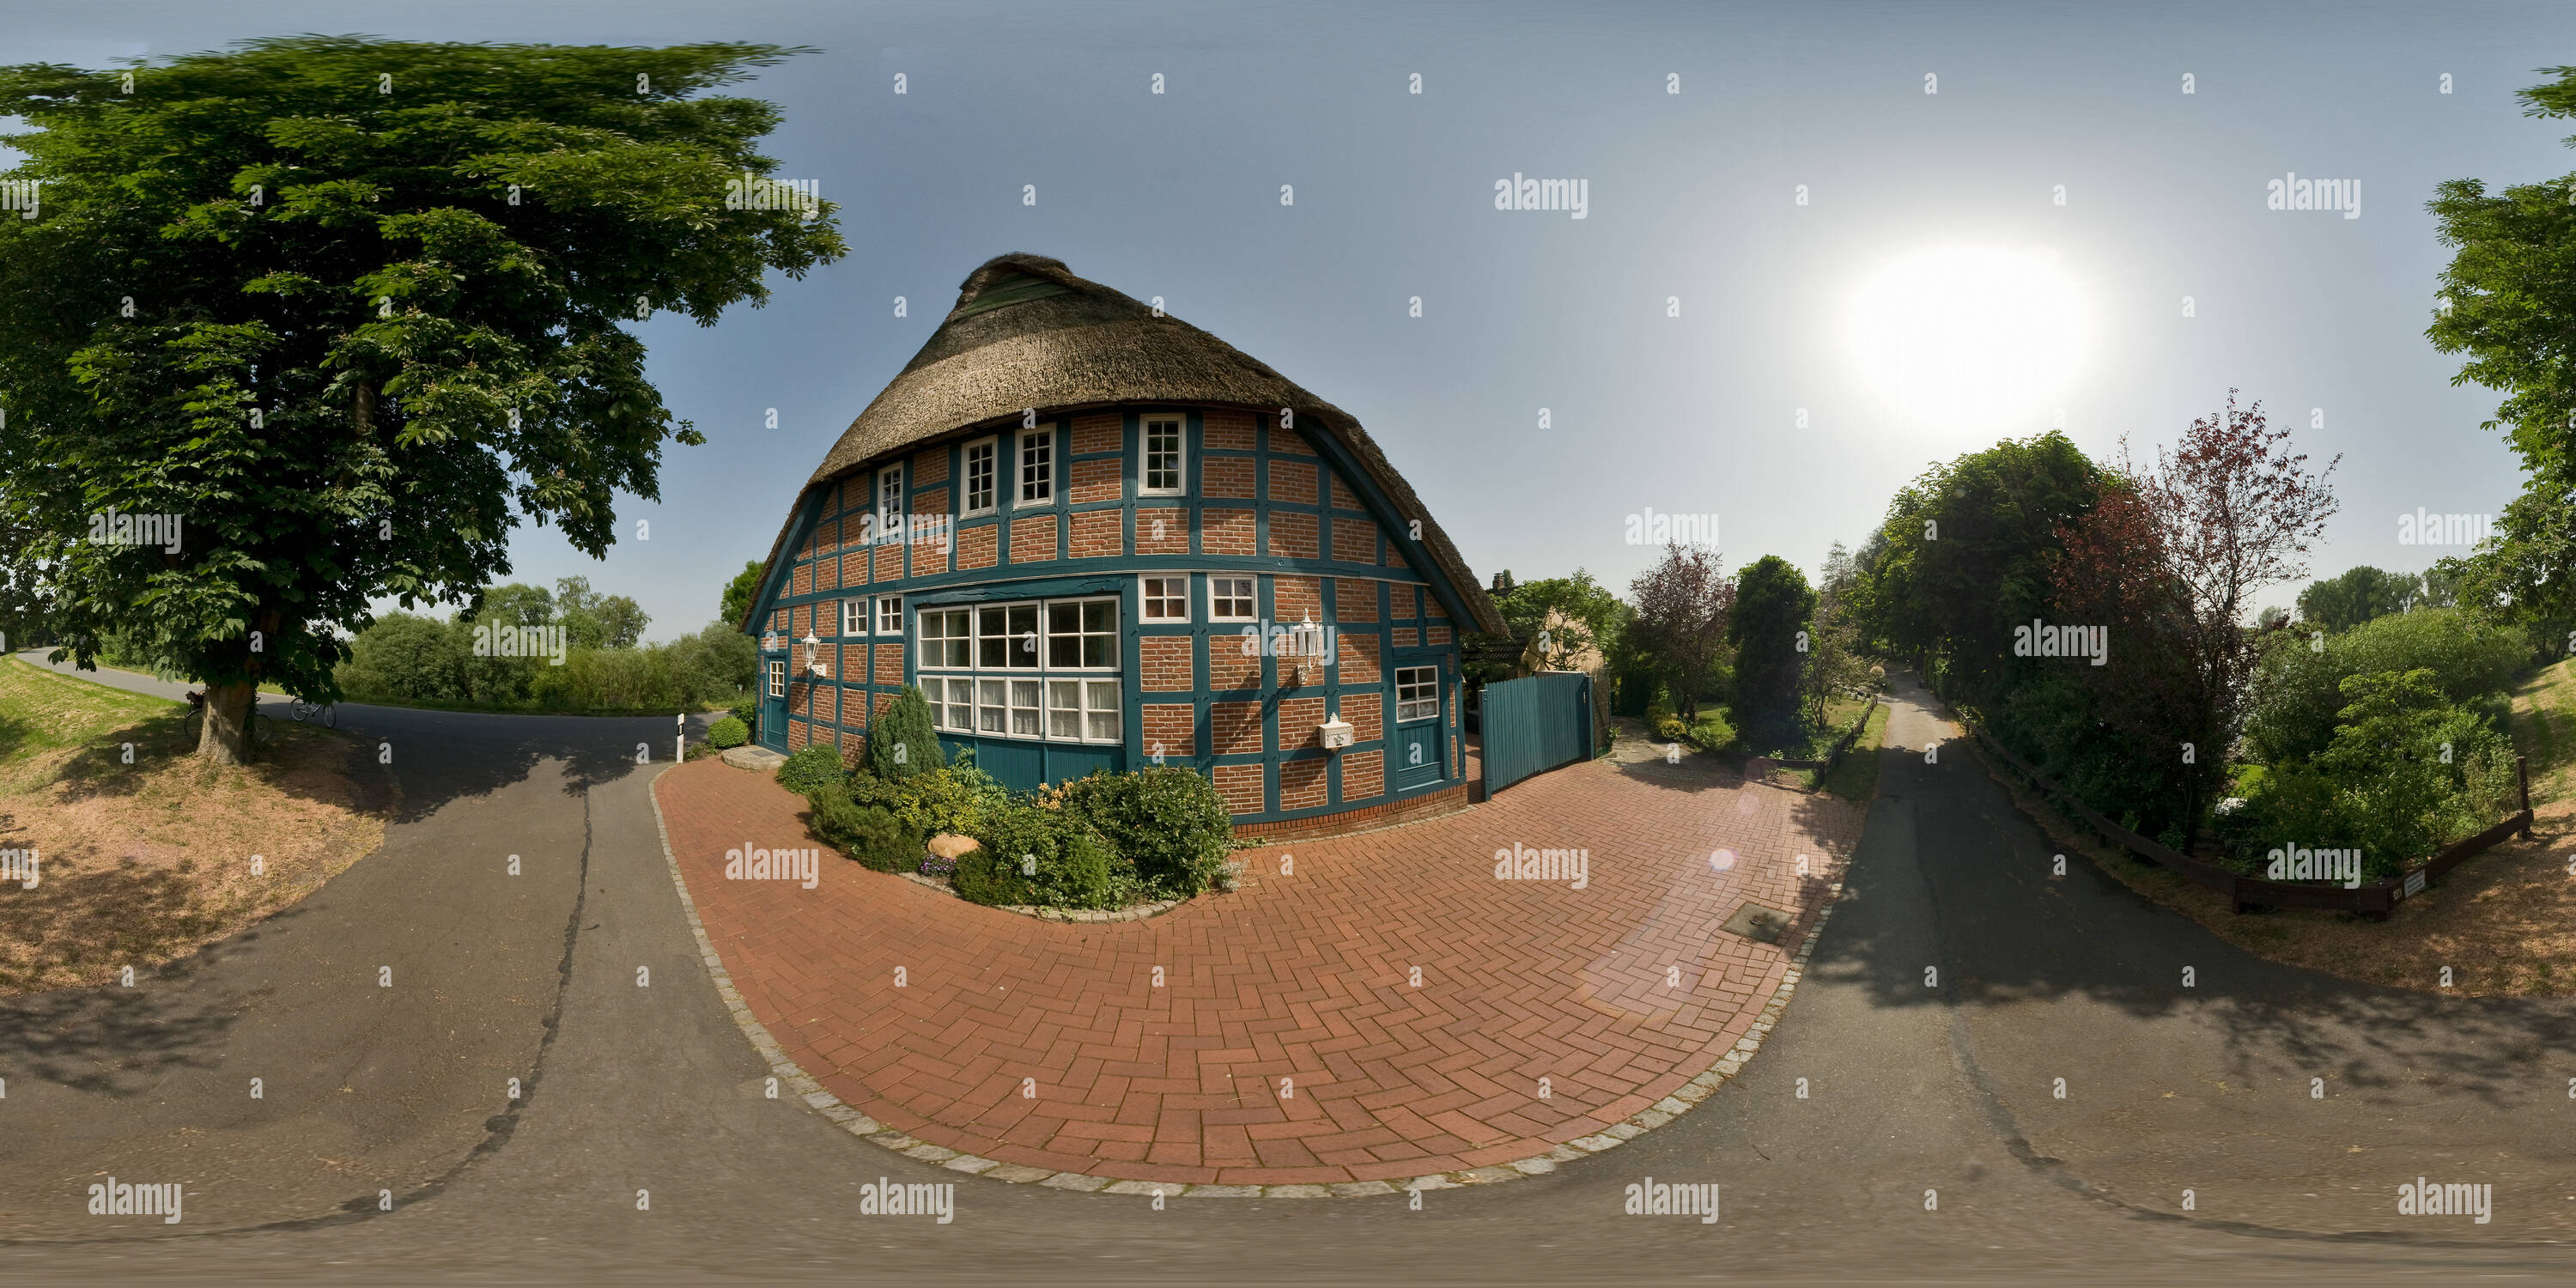 360 degree panoramic view of Blockland Wuemme Deich